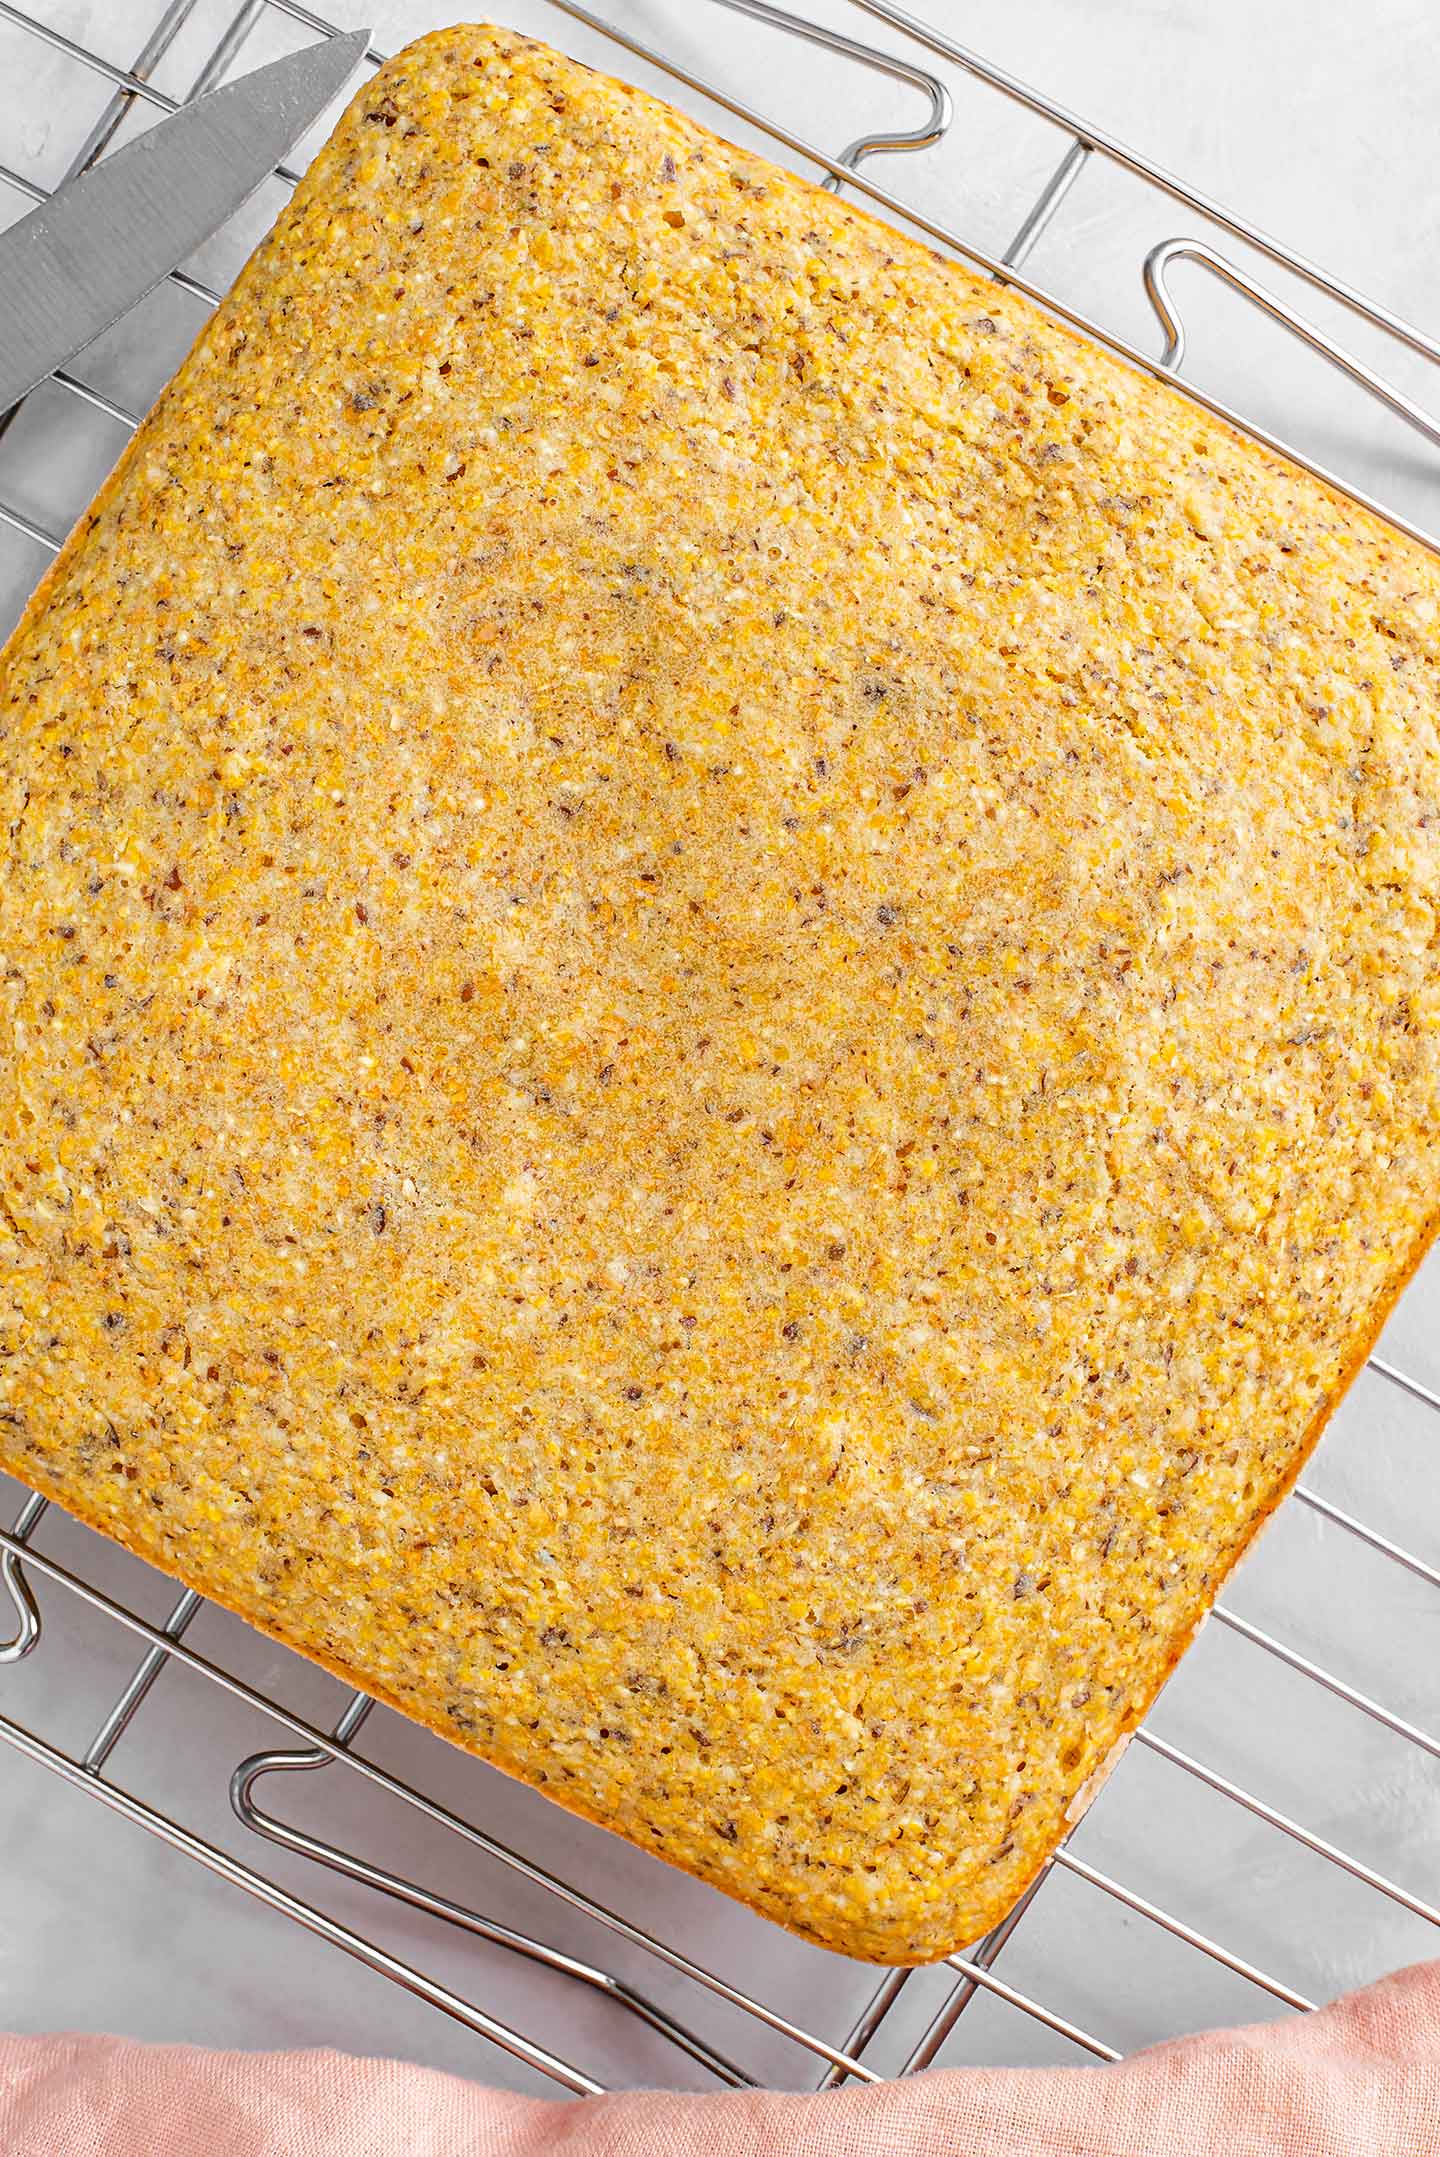 Top down view of a baked, golden square loaf of cornbread cooling on a wire rack.